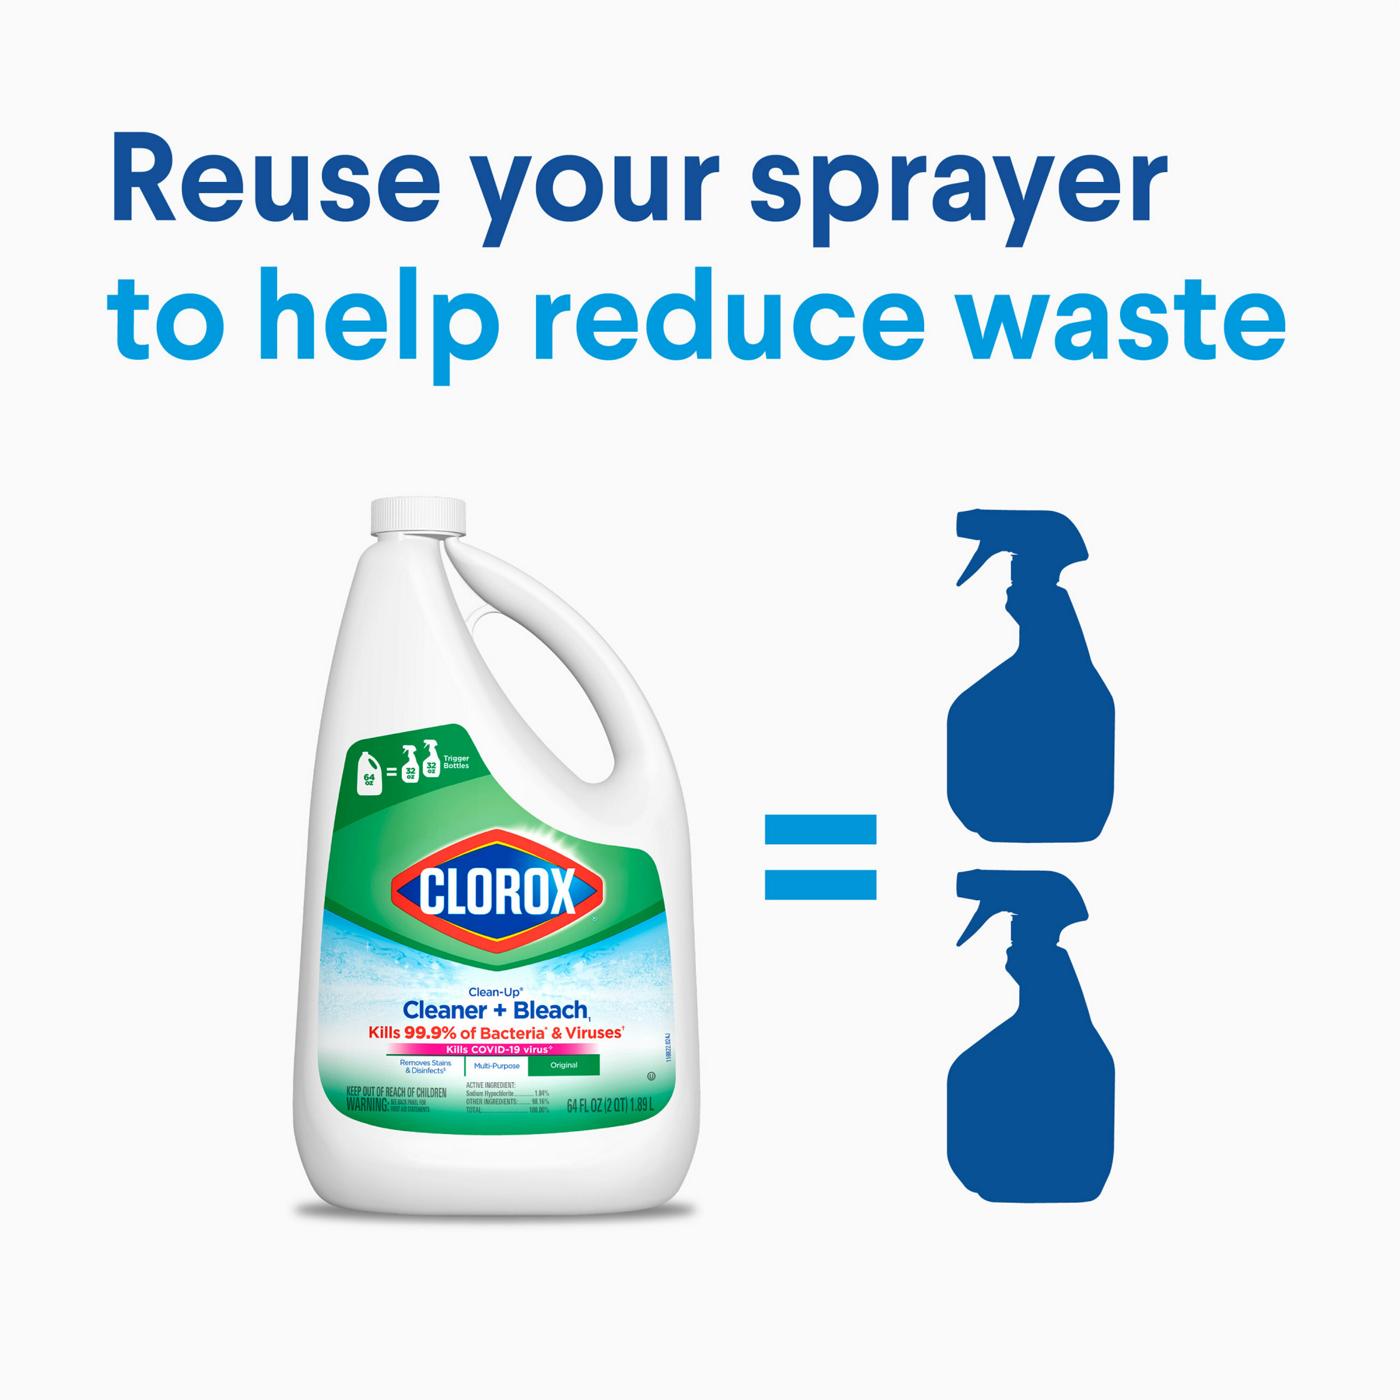 Clorox Clean-Up Cleaner & Bleach; image 7 of 13